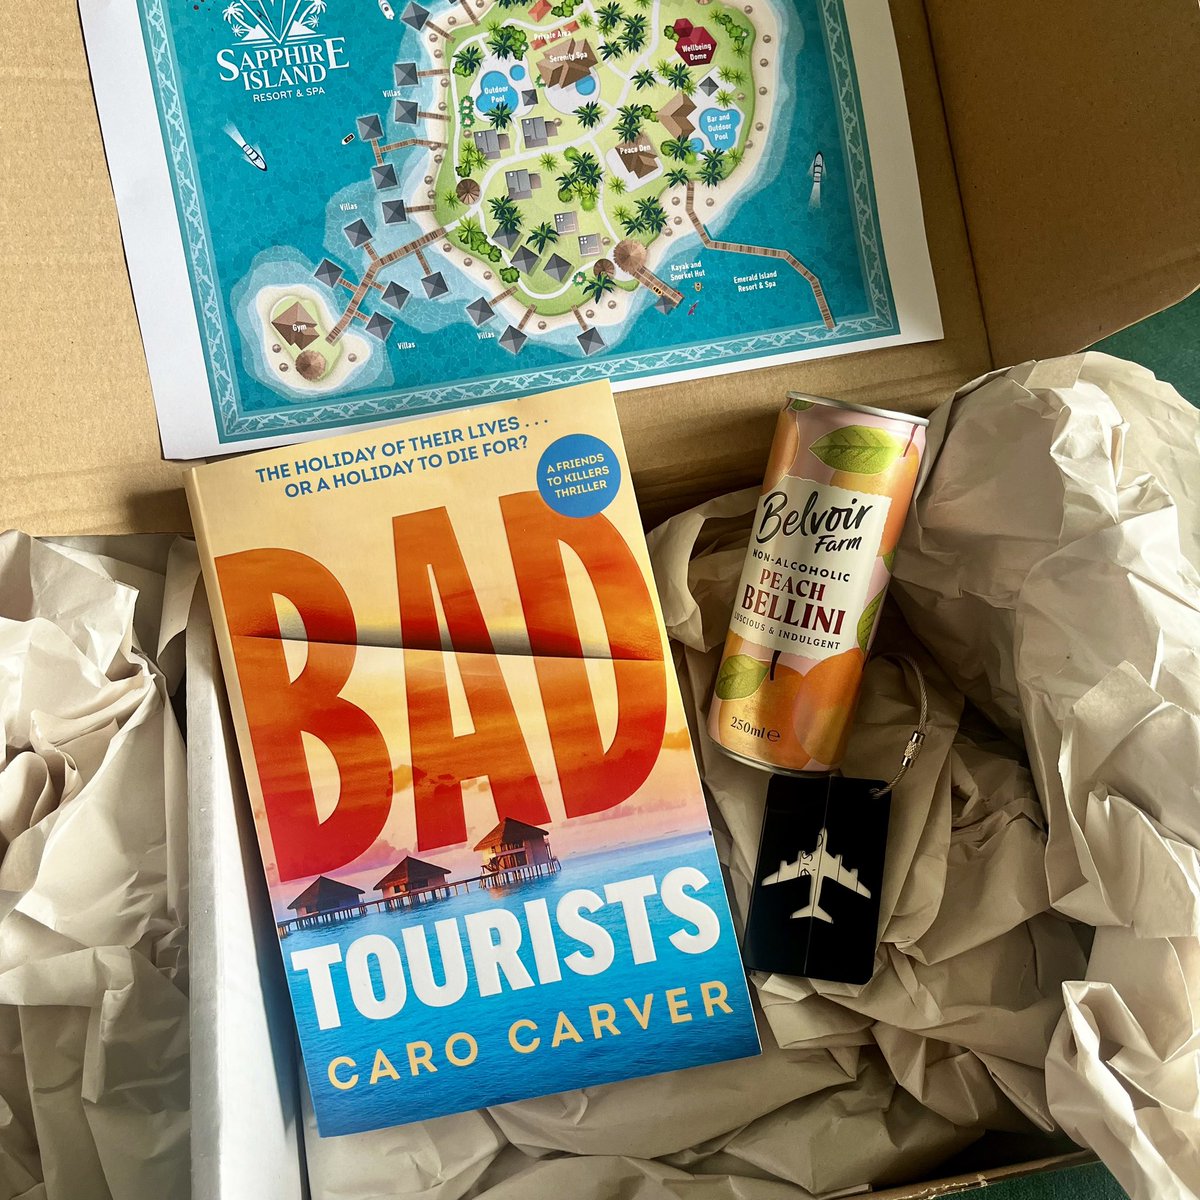 You know I love a destination thriller so I was really excited to get a copy of #BadTourists by @carverofbooks along with some fabulous goodies! It’s out on 4th July so get your pre-orders in now @TransworldBooks